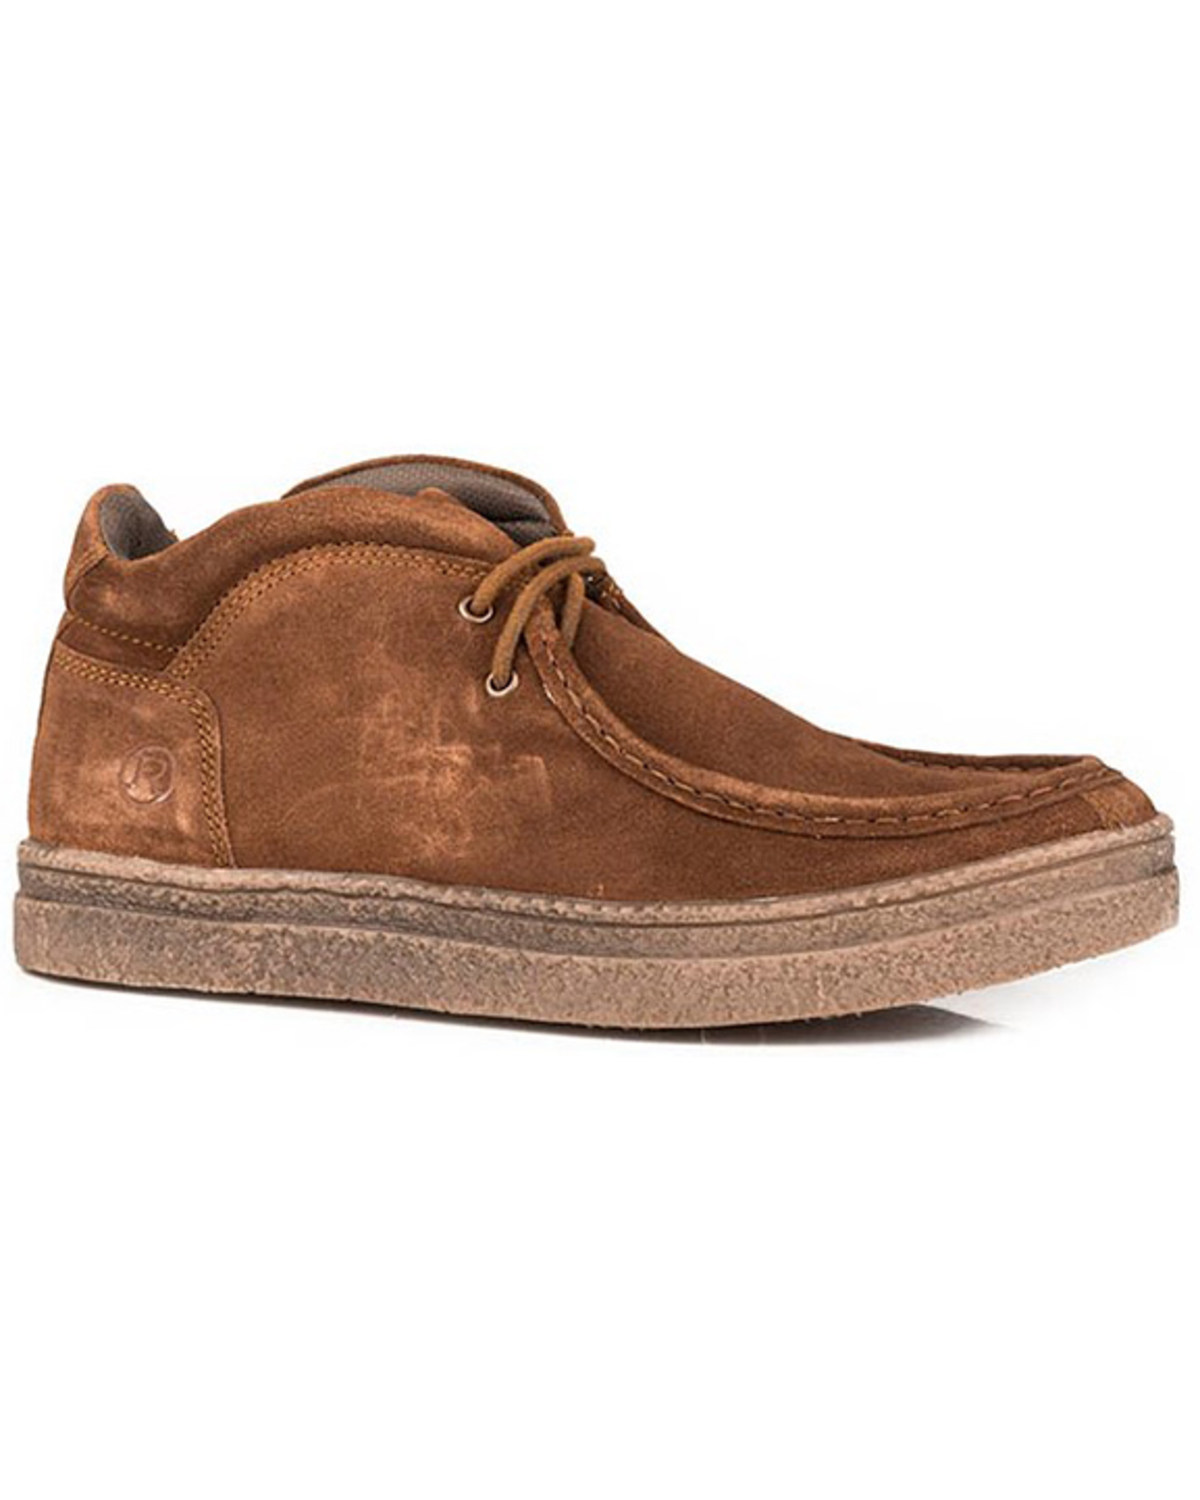 Roper Men's Ryder Embossed TPR Crepe Lace-Up Casual Chukka Shoes - Moc Toe